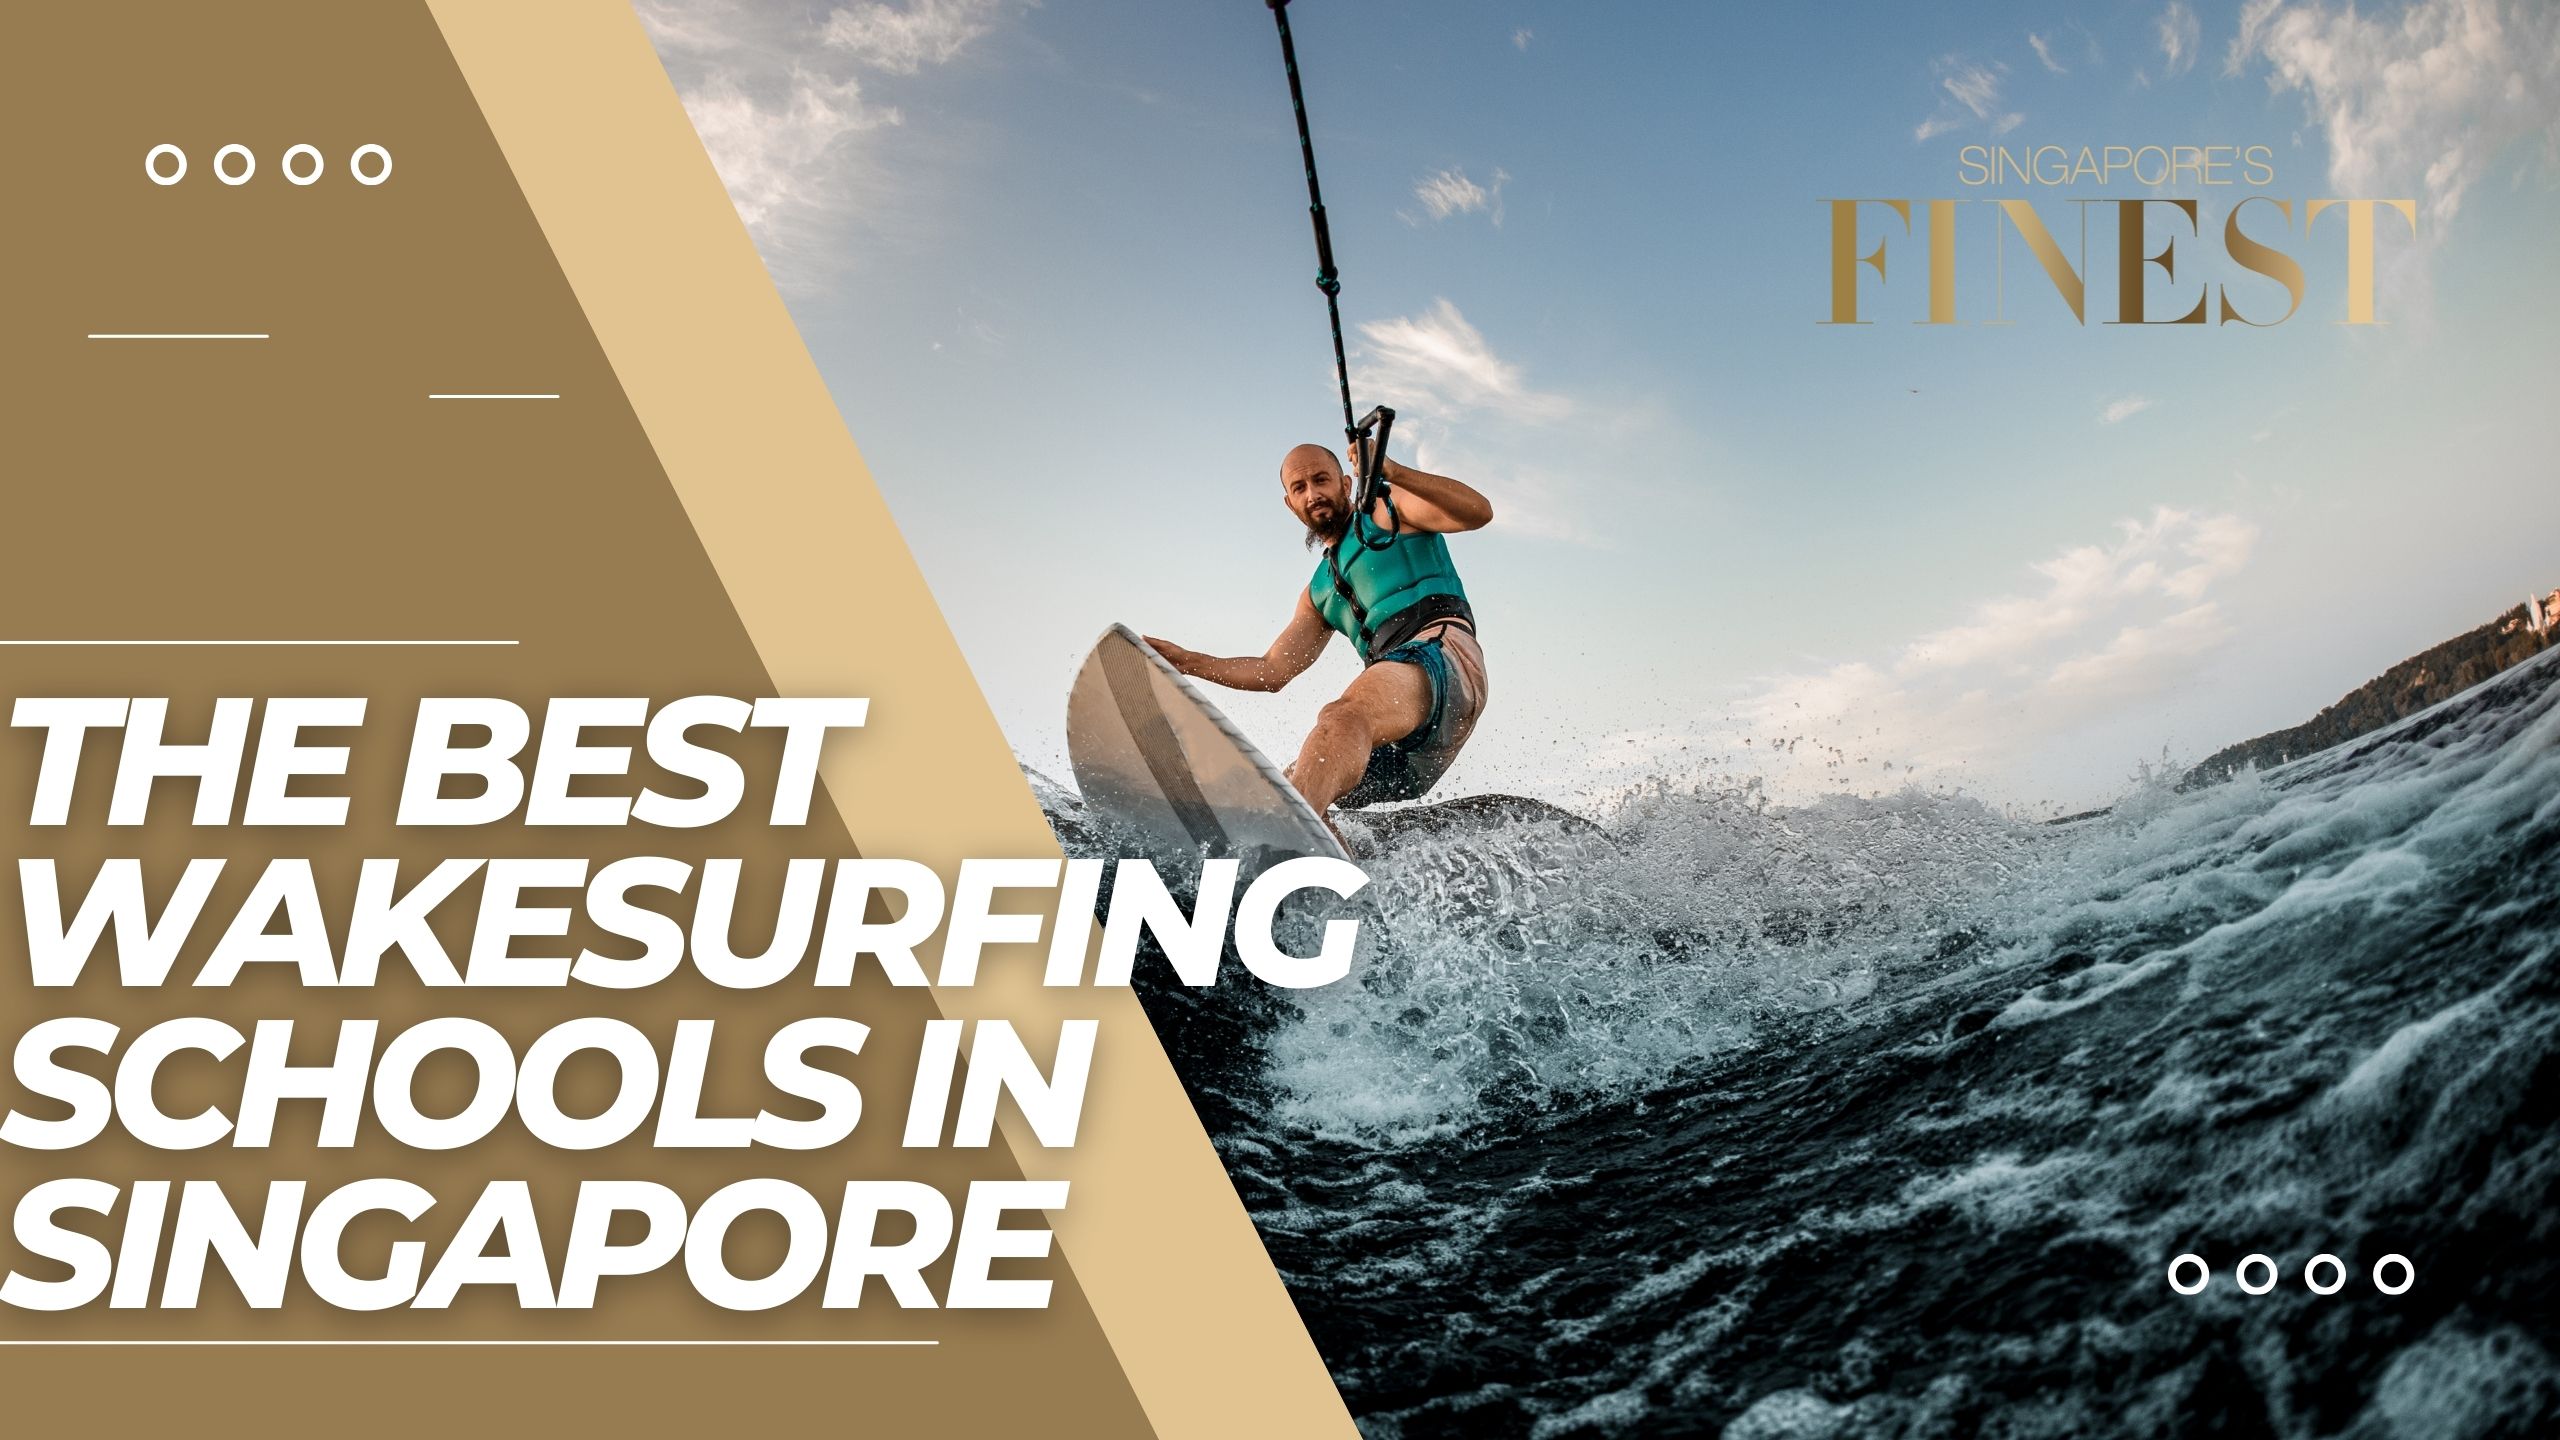 The Finest Wake Surfing Schools in Singapore